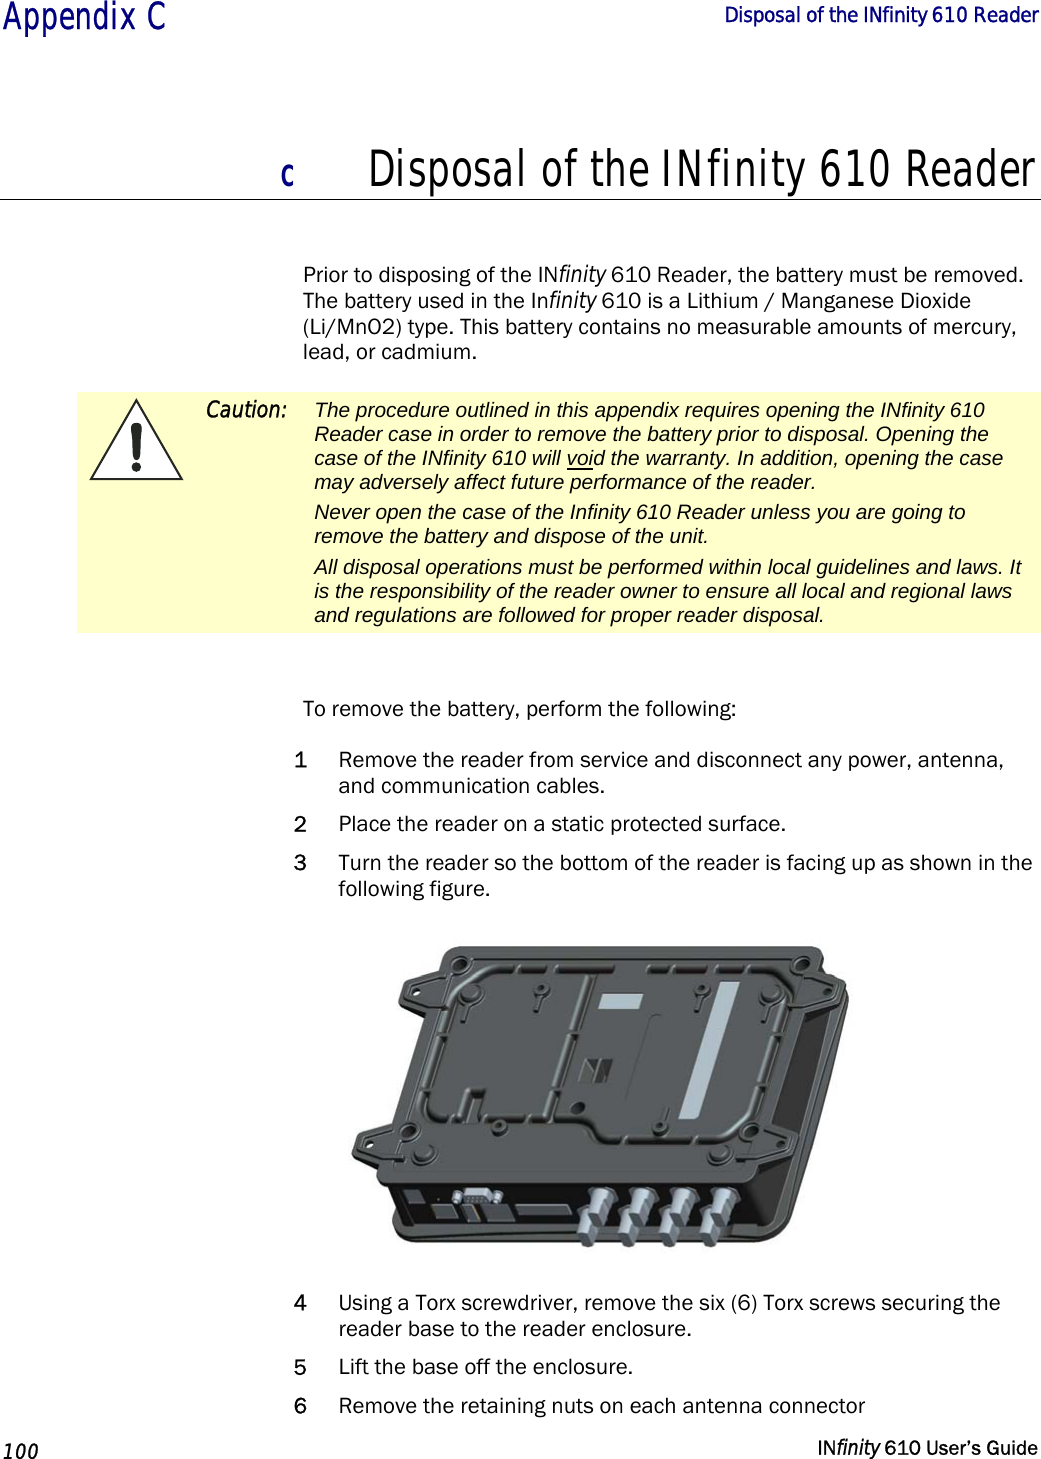  Appendix C        Disposal of the INfinity 610 Reader   100   INfinity 610 User’s Guide  C Disposal of the INfinity 610 Reader  Prior to disposing of the INfinity 610 Reader, the battery must be removed. The battery used in the Infinity 610 is a Lithium / Manganese Dioxide (Li/MnO2) type. This battery contains no measurable amounts of mercury, lead, or cadmium.  Caution:  The procedure outlined in this appendix requires opening the INfinity 610 Reader case in order to remove the battery prior to disposal. Opening the case of the INfinity 610 will void the warranty. In addition, opening the case may adversely affect future performance of the reader. Never open the case of the Infinity 610 Reader unless you are going to remove the battery and dispose of the unit. All disposal operations must be performed within local guidelines and laws. It is the responsibility of the reader owner to ensure all local and regional laws and regulations are followed for proper reader disposal.   To remove the battery, perform the following: 1 Remove the reader from service and disconnect any power, antenna, and communication cables. 2 Place the reader on a static protected surface. 3 Turn the reader so the bottom of the reader is facing up as shown in the following figure.  4 Using a Torx screwdriver, remove the six (6) Torx screws securing the reader base to the reader enclosure. 5 Lift the base off the enclosure. 6 Remove the retaining nuts on each antenna connector 